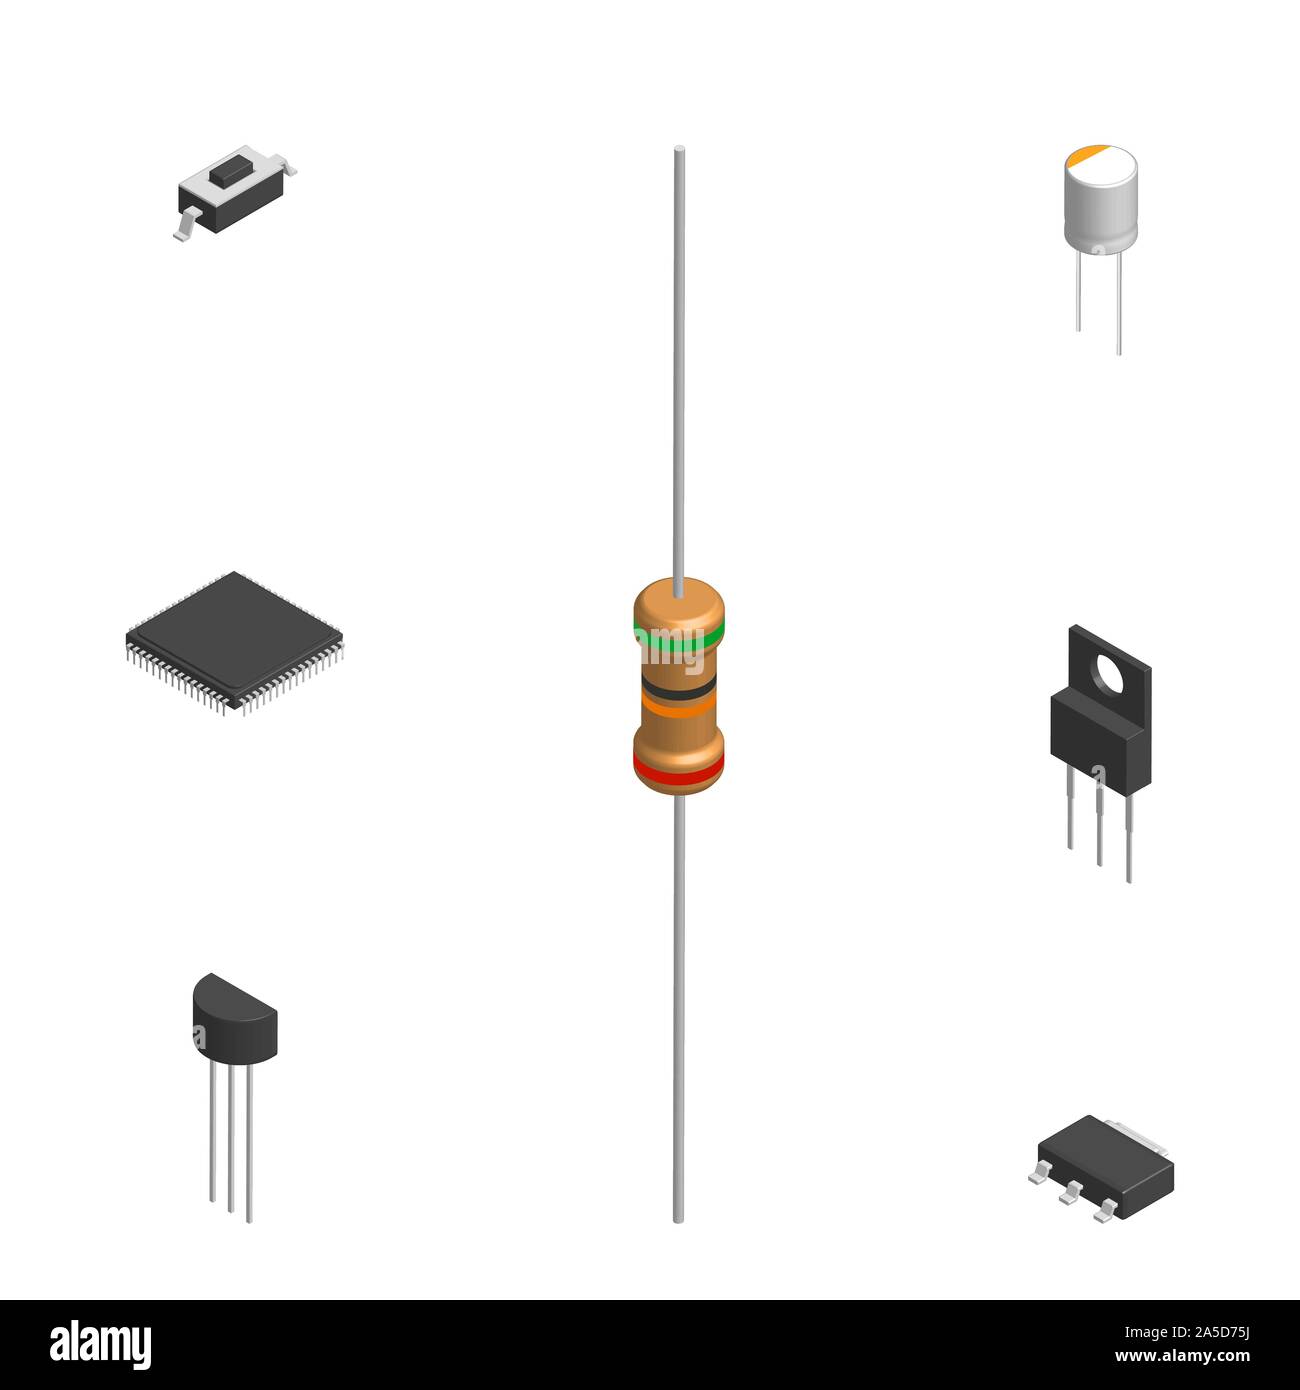 Set of different active and passive electronic components isolated on white background. Resistor, capacitor, diode, microcircuit, fuse and button. 3D Stock Vector